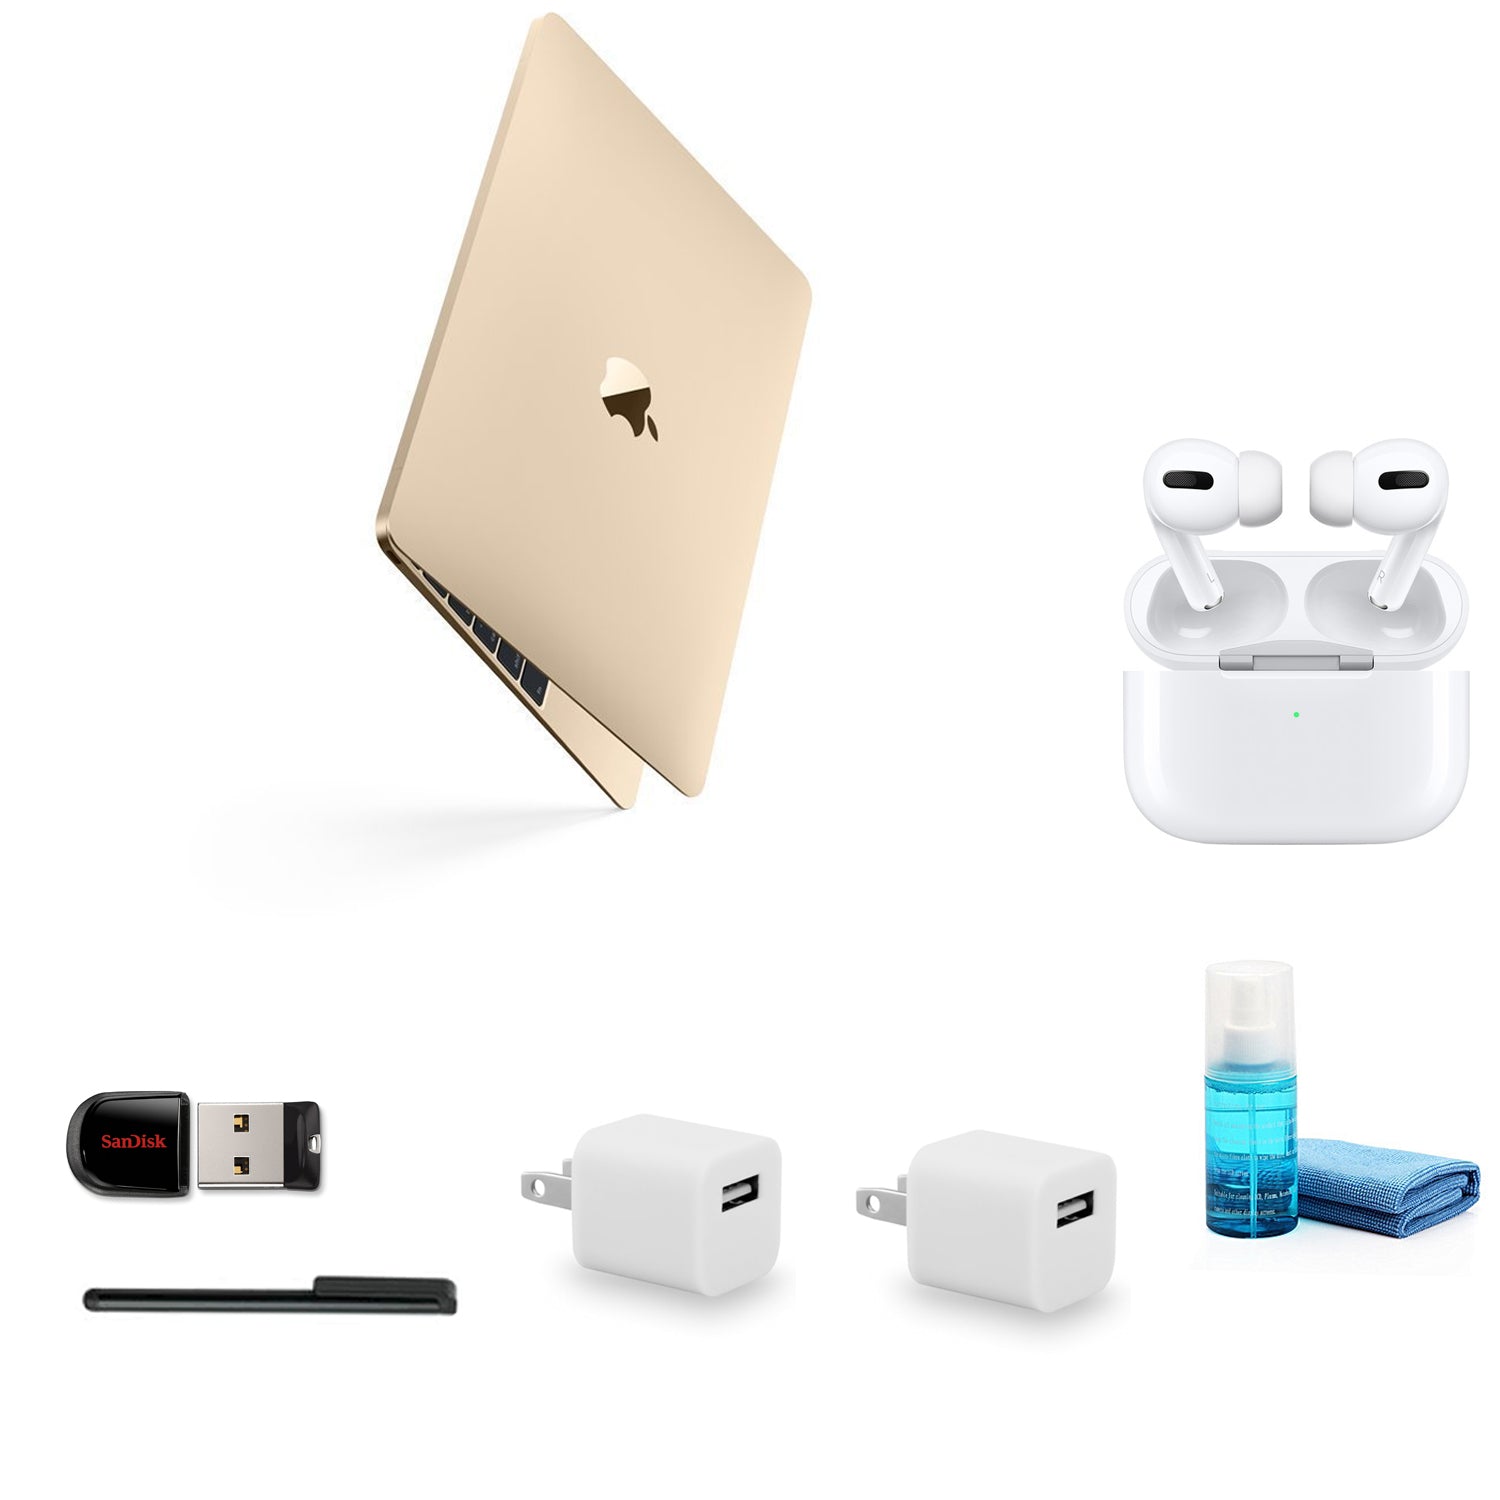 Apple Macbook 12 Inch Laptop, Retina, 512GB Gold (Spanish Keyboard) MNYL2E/A with Apple AirPods Pro